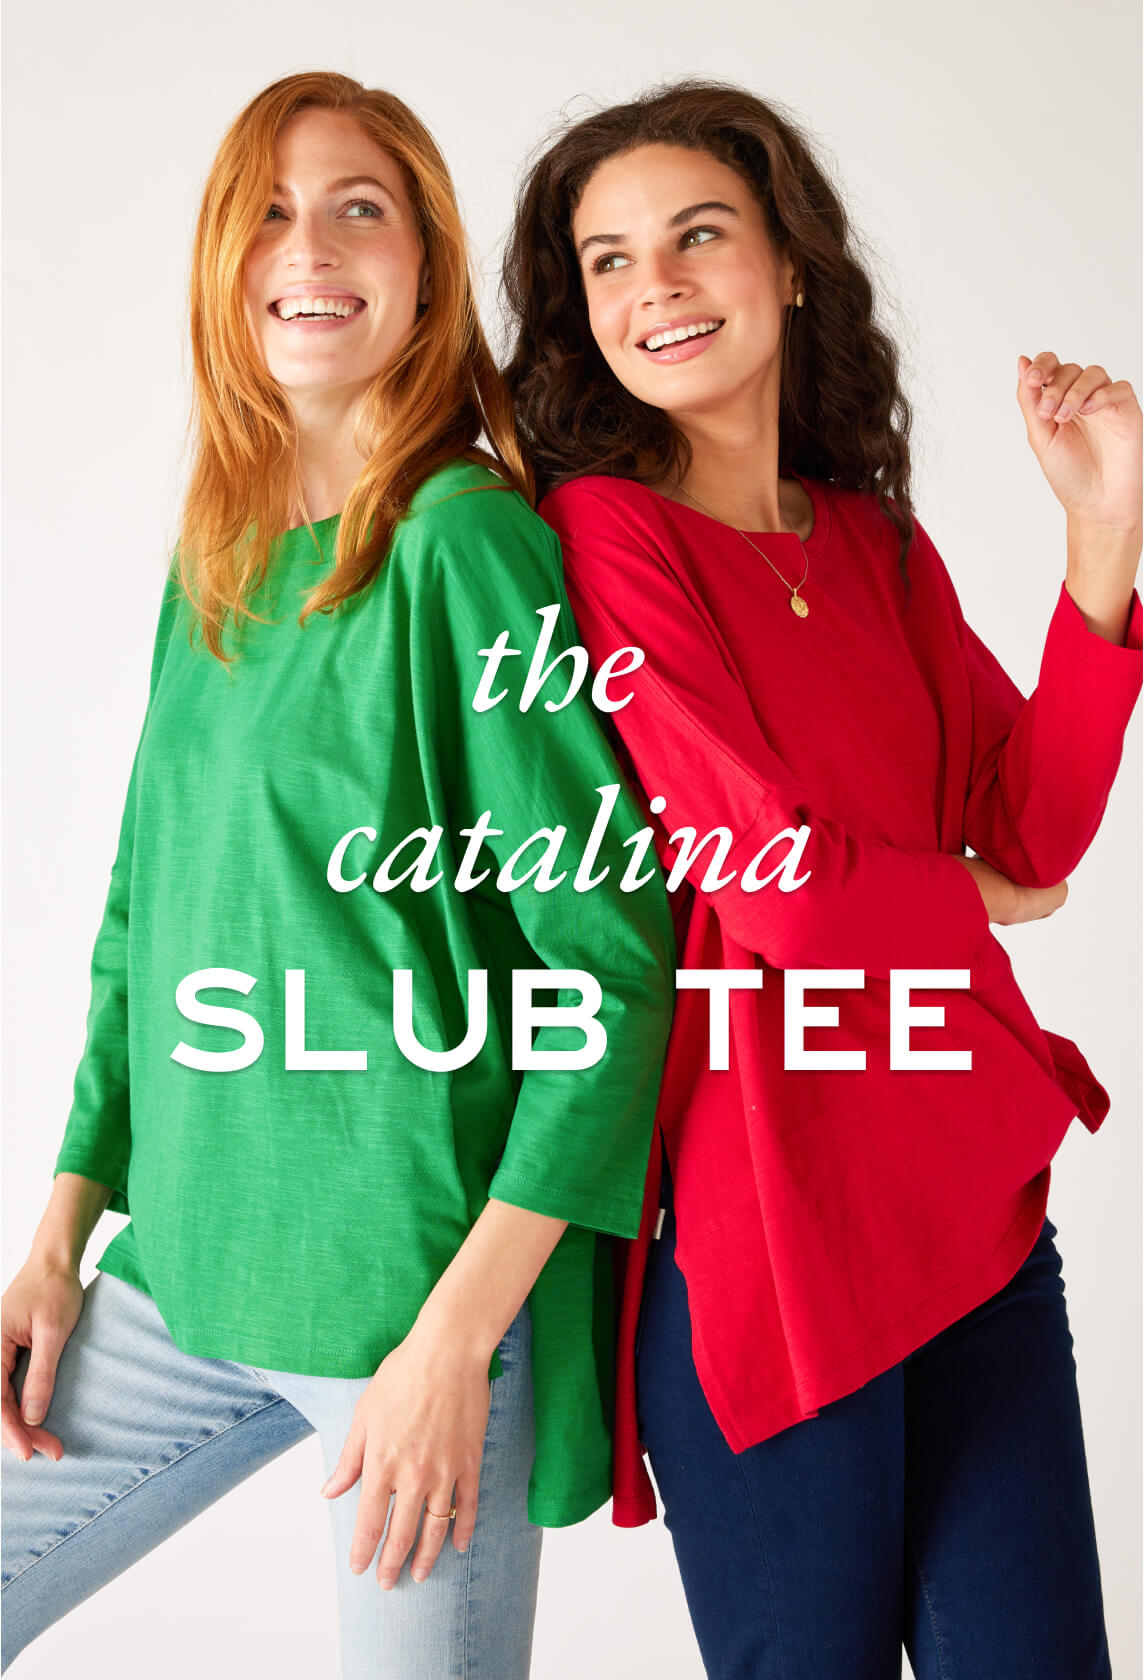 the catalina slub tee - two girls leaning back to back on a white background wearing catalina slub tees in green and red